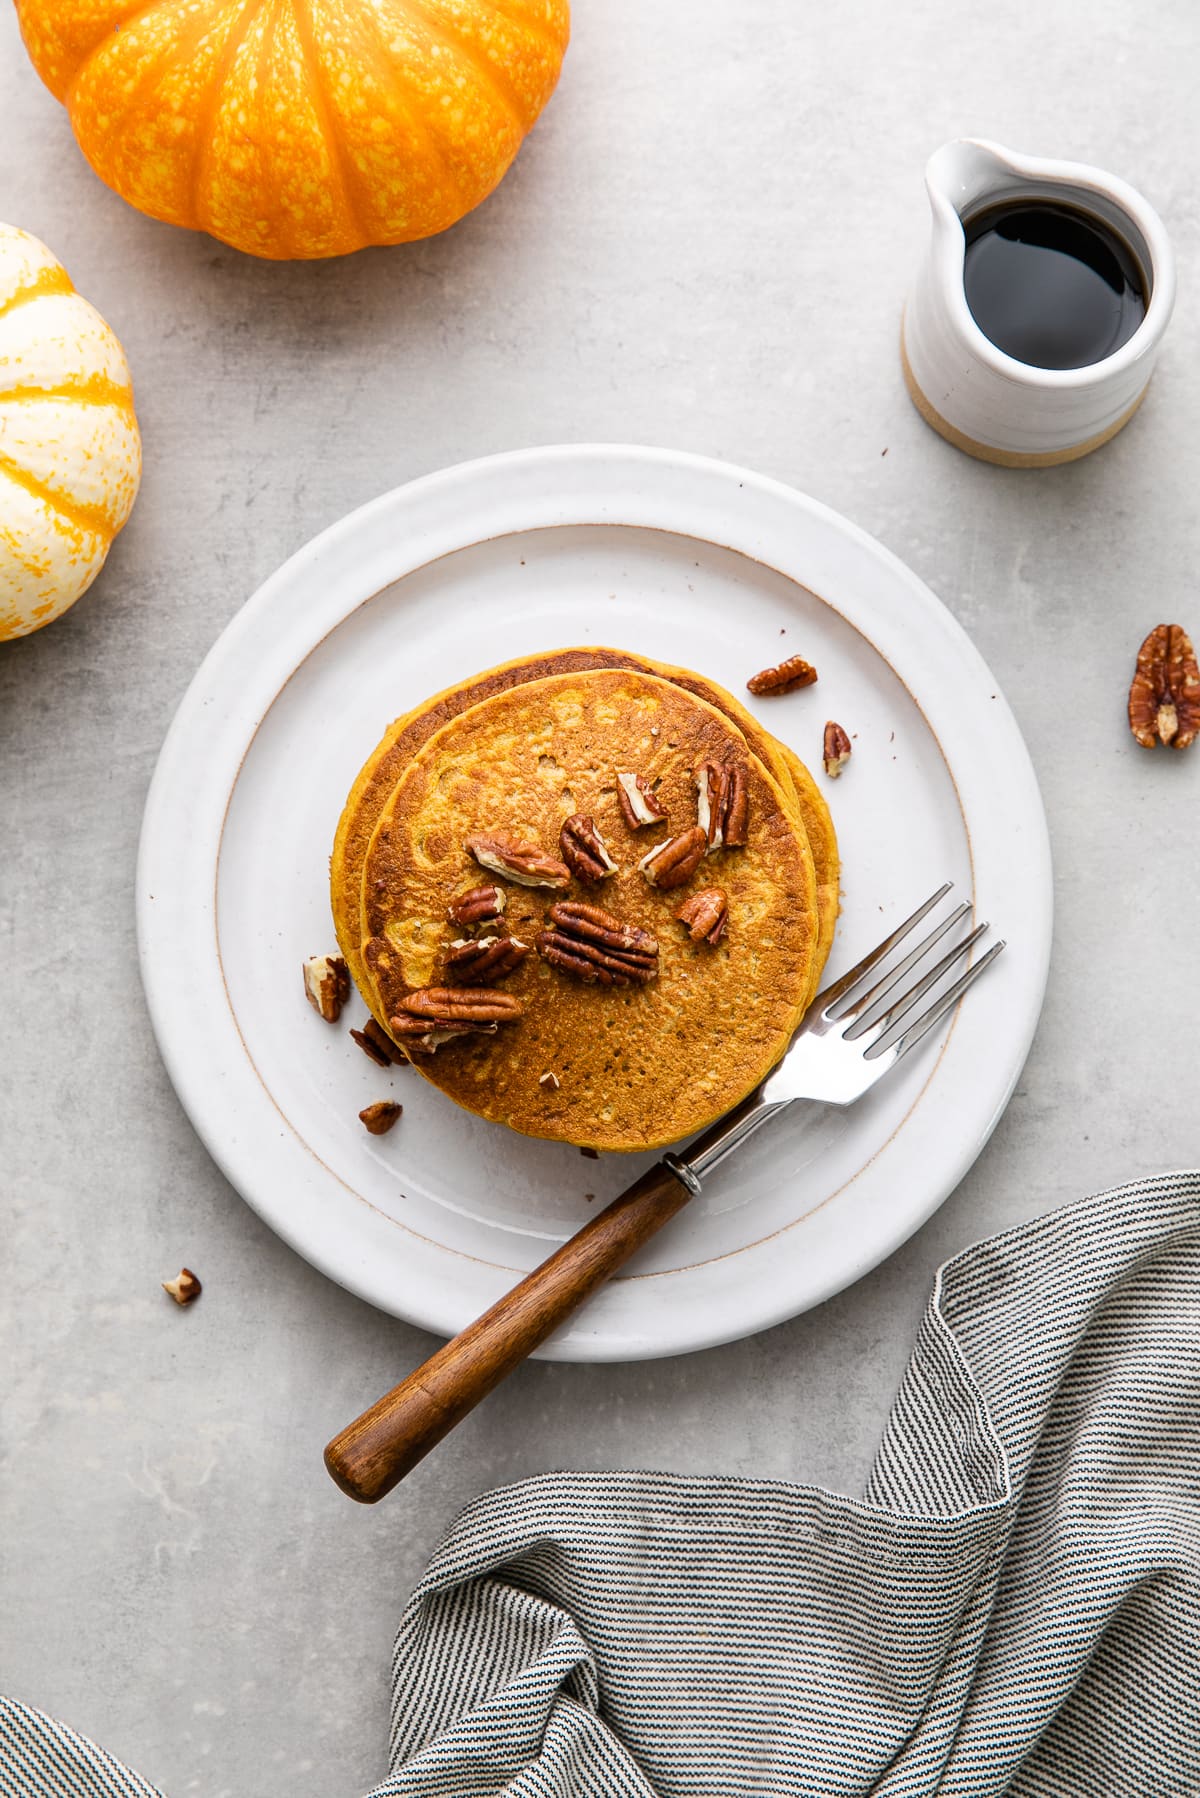 top down view of freshly made pumpkin pancakes on a plate with fork and items surrounding.